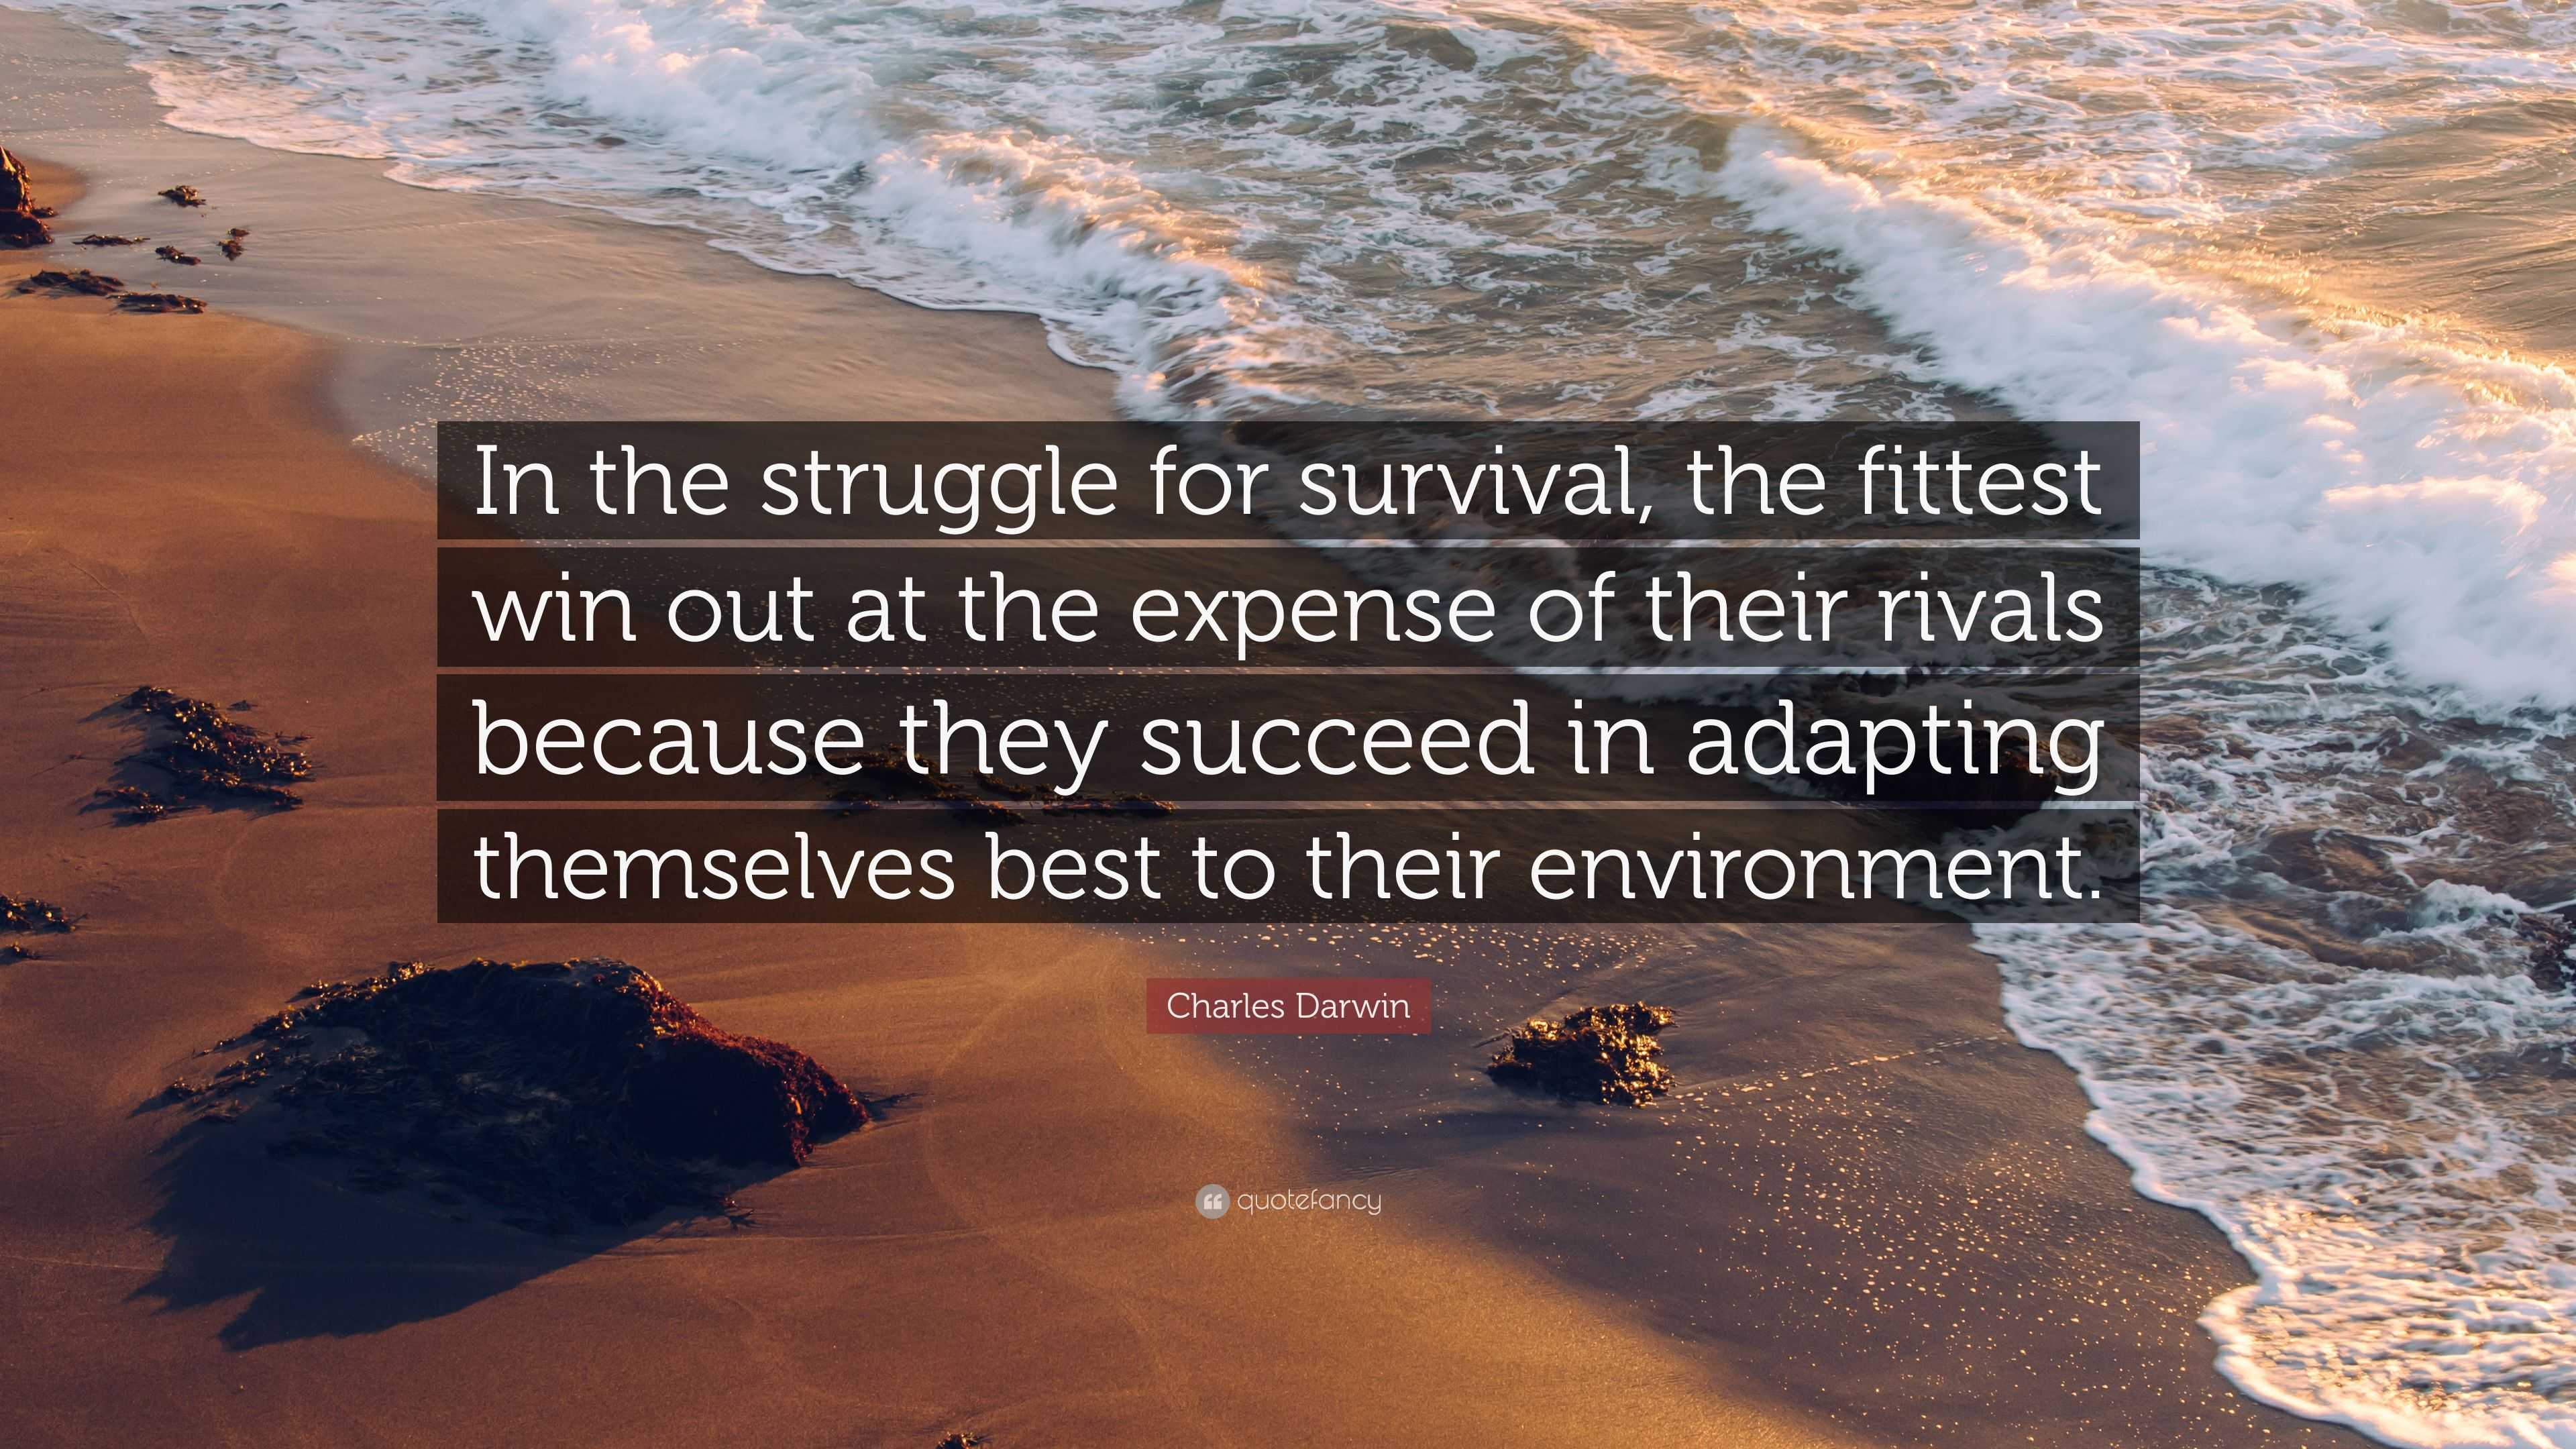 Charles Darwin Quote “In the struggle for survival, the